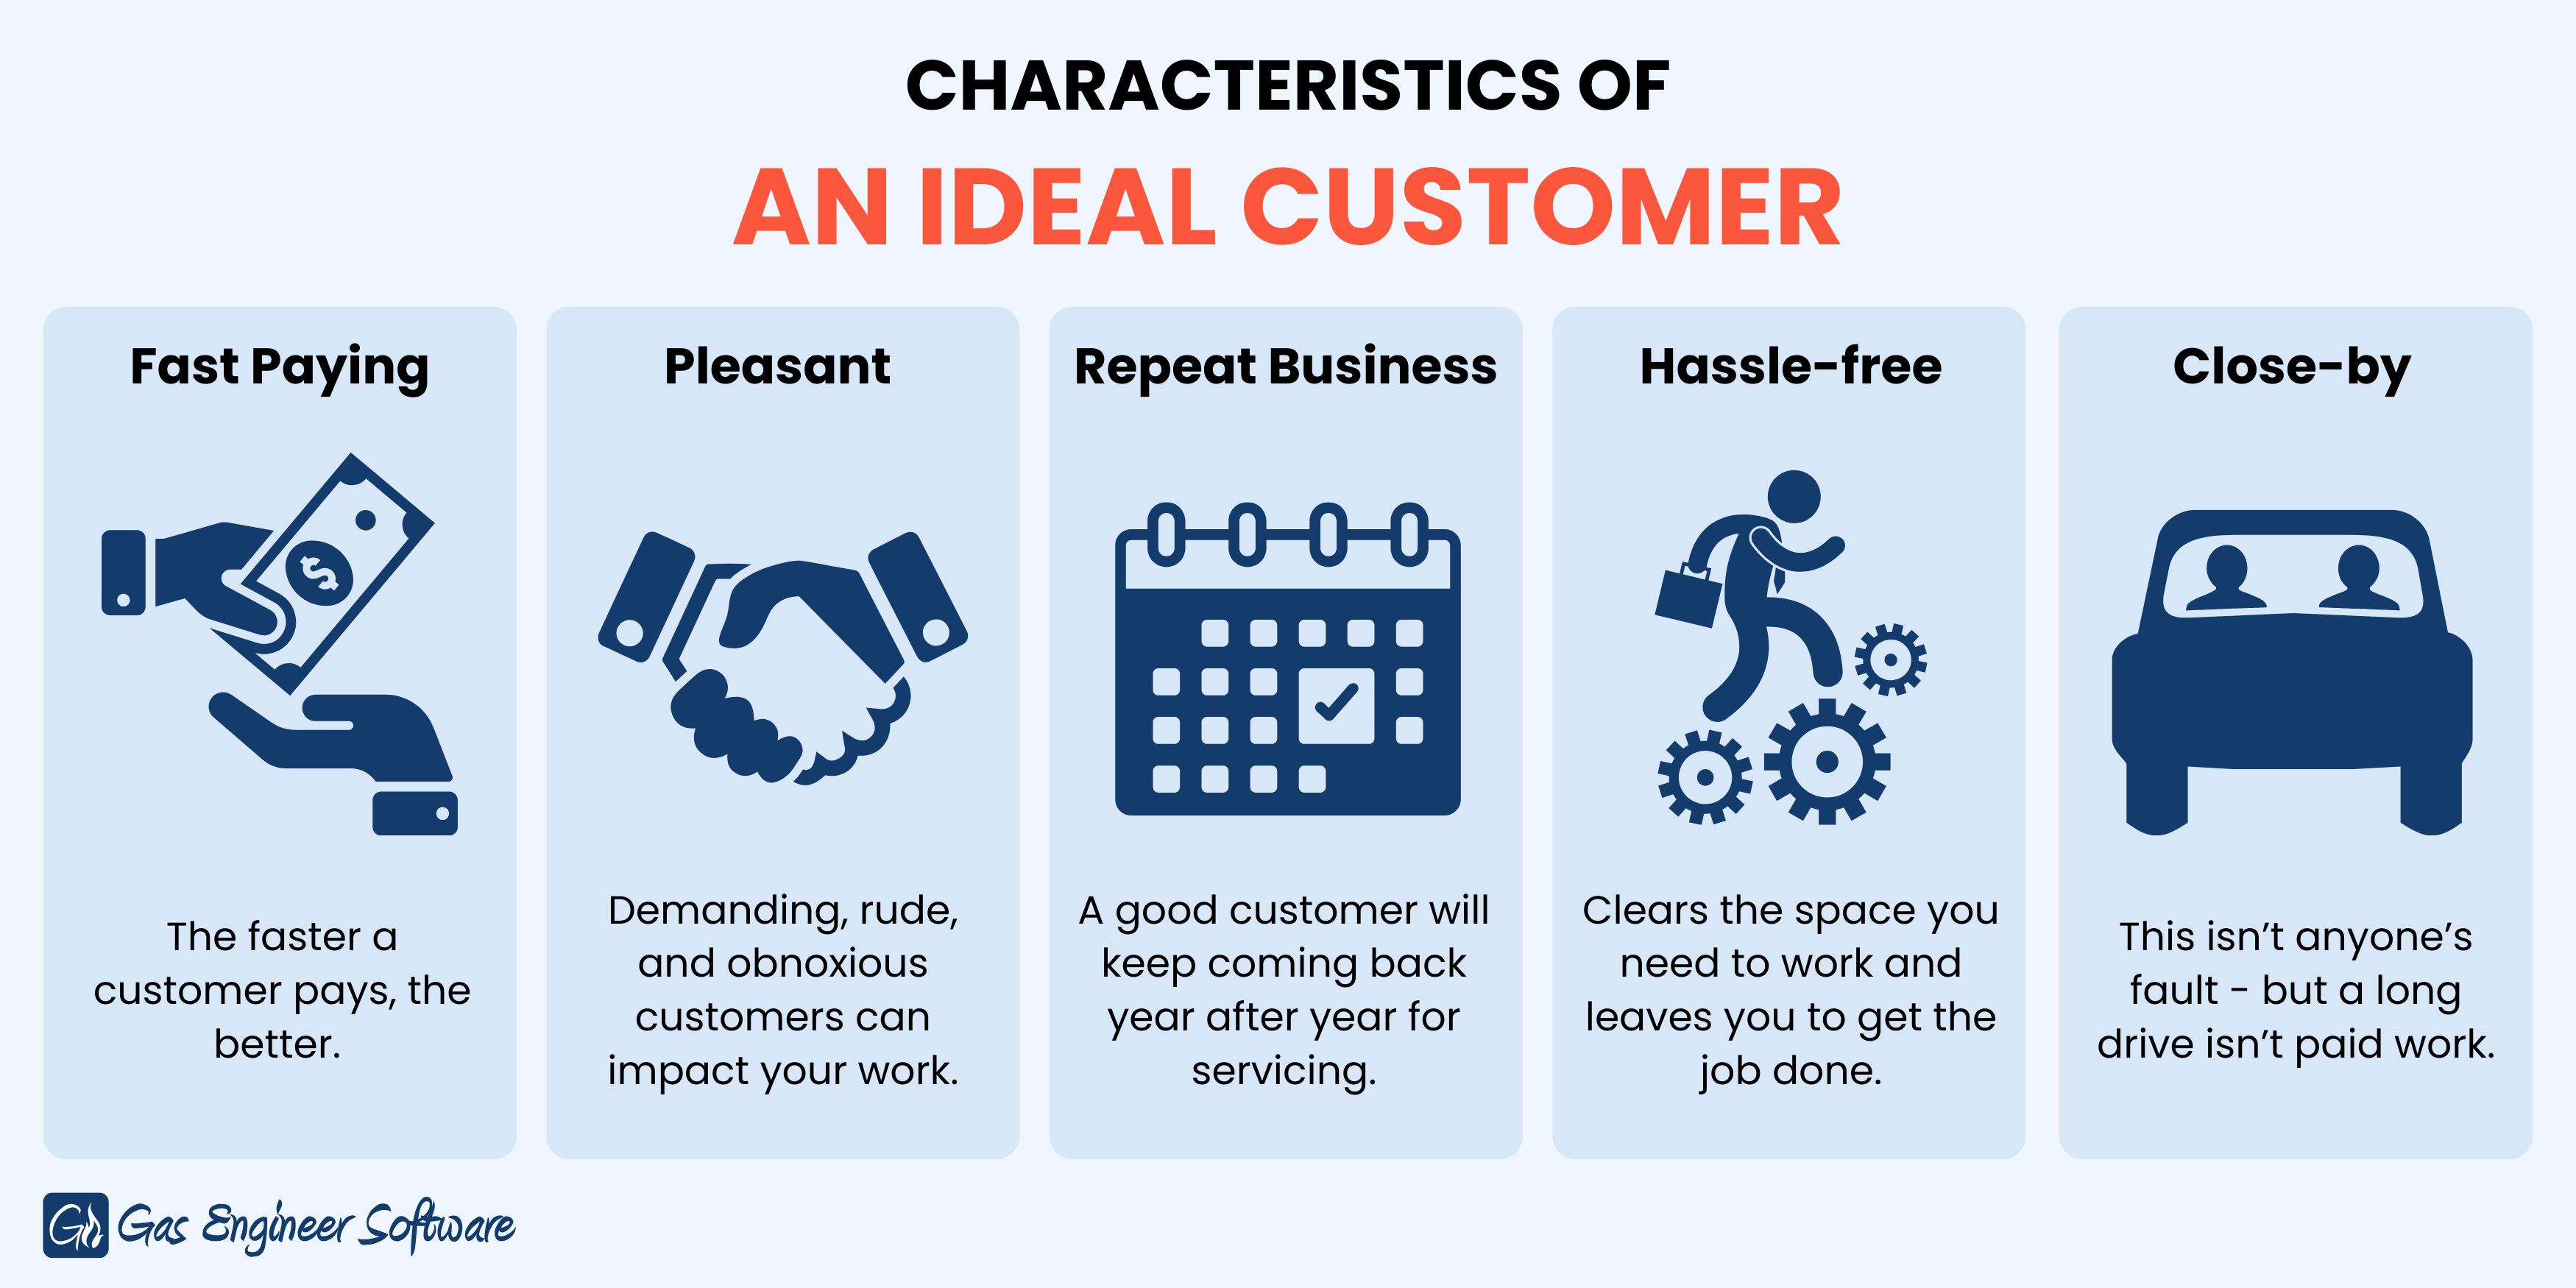 The top 5 characteristics of a gas engineer's ideal customer